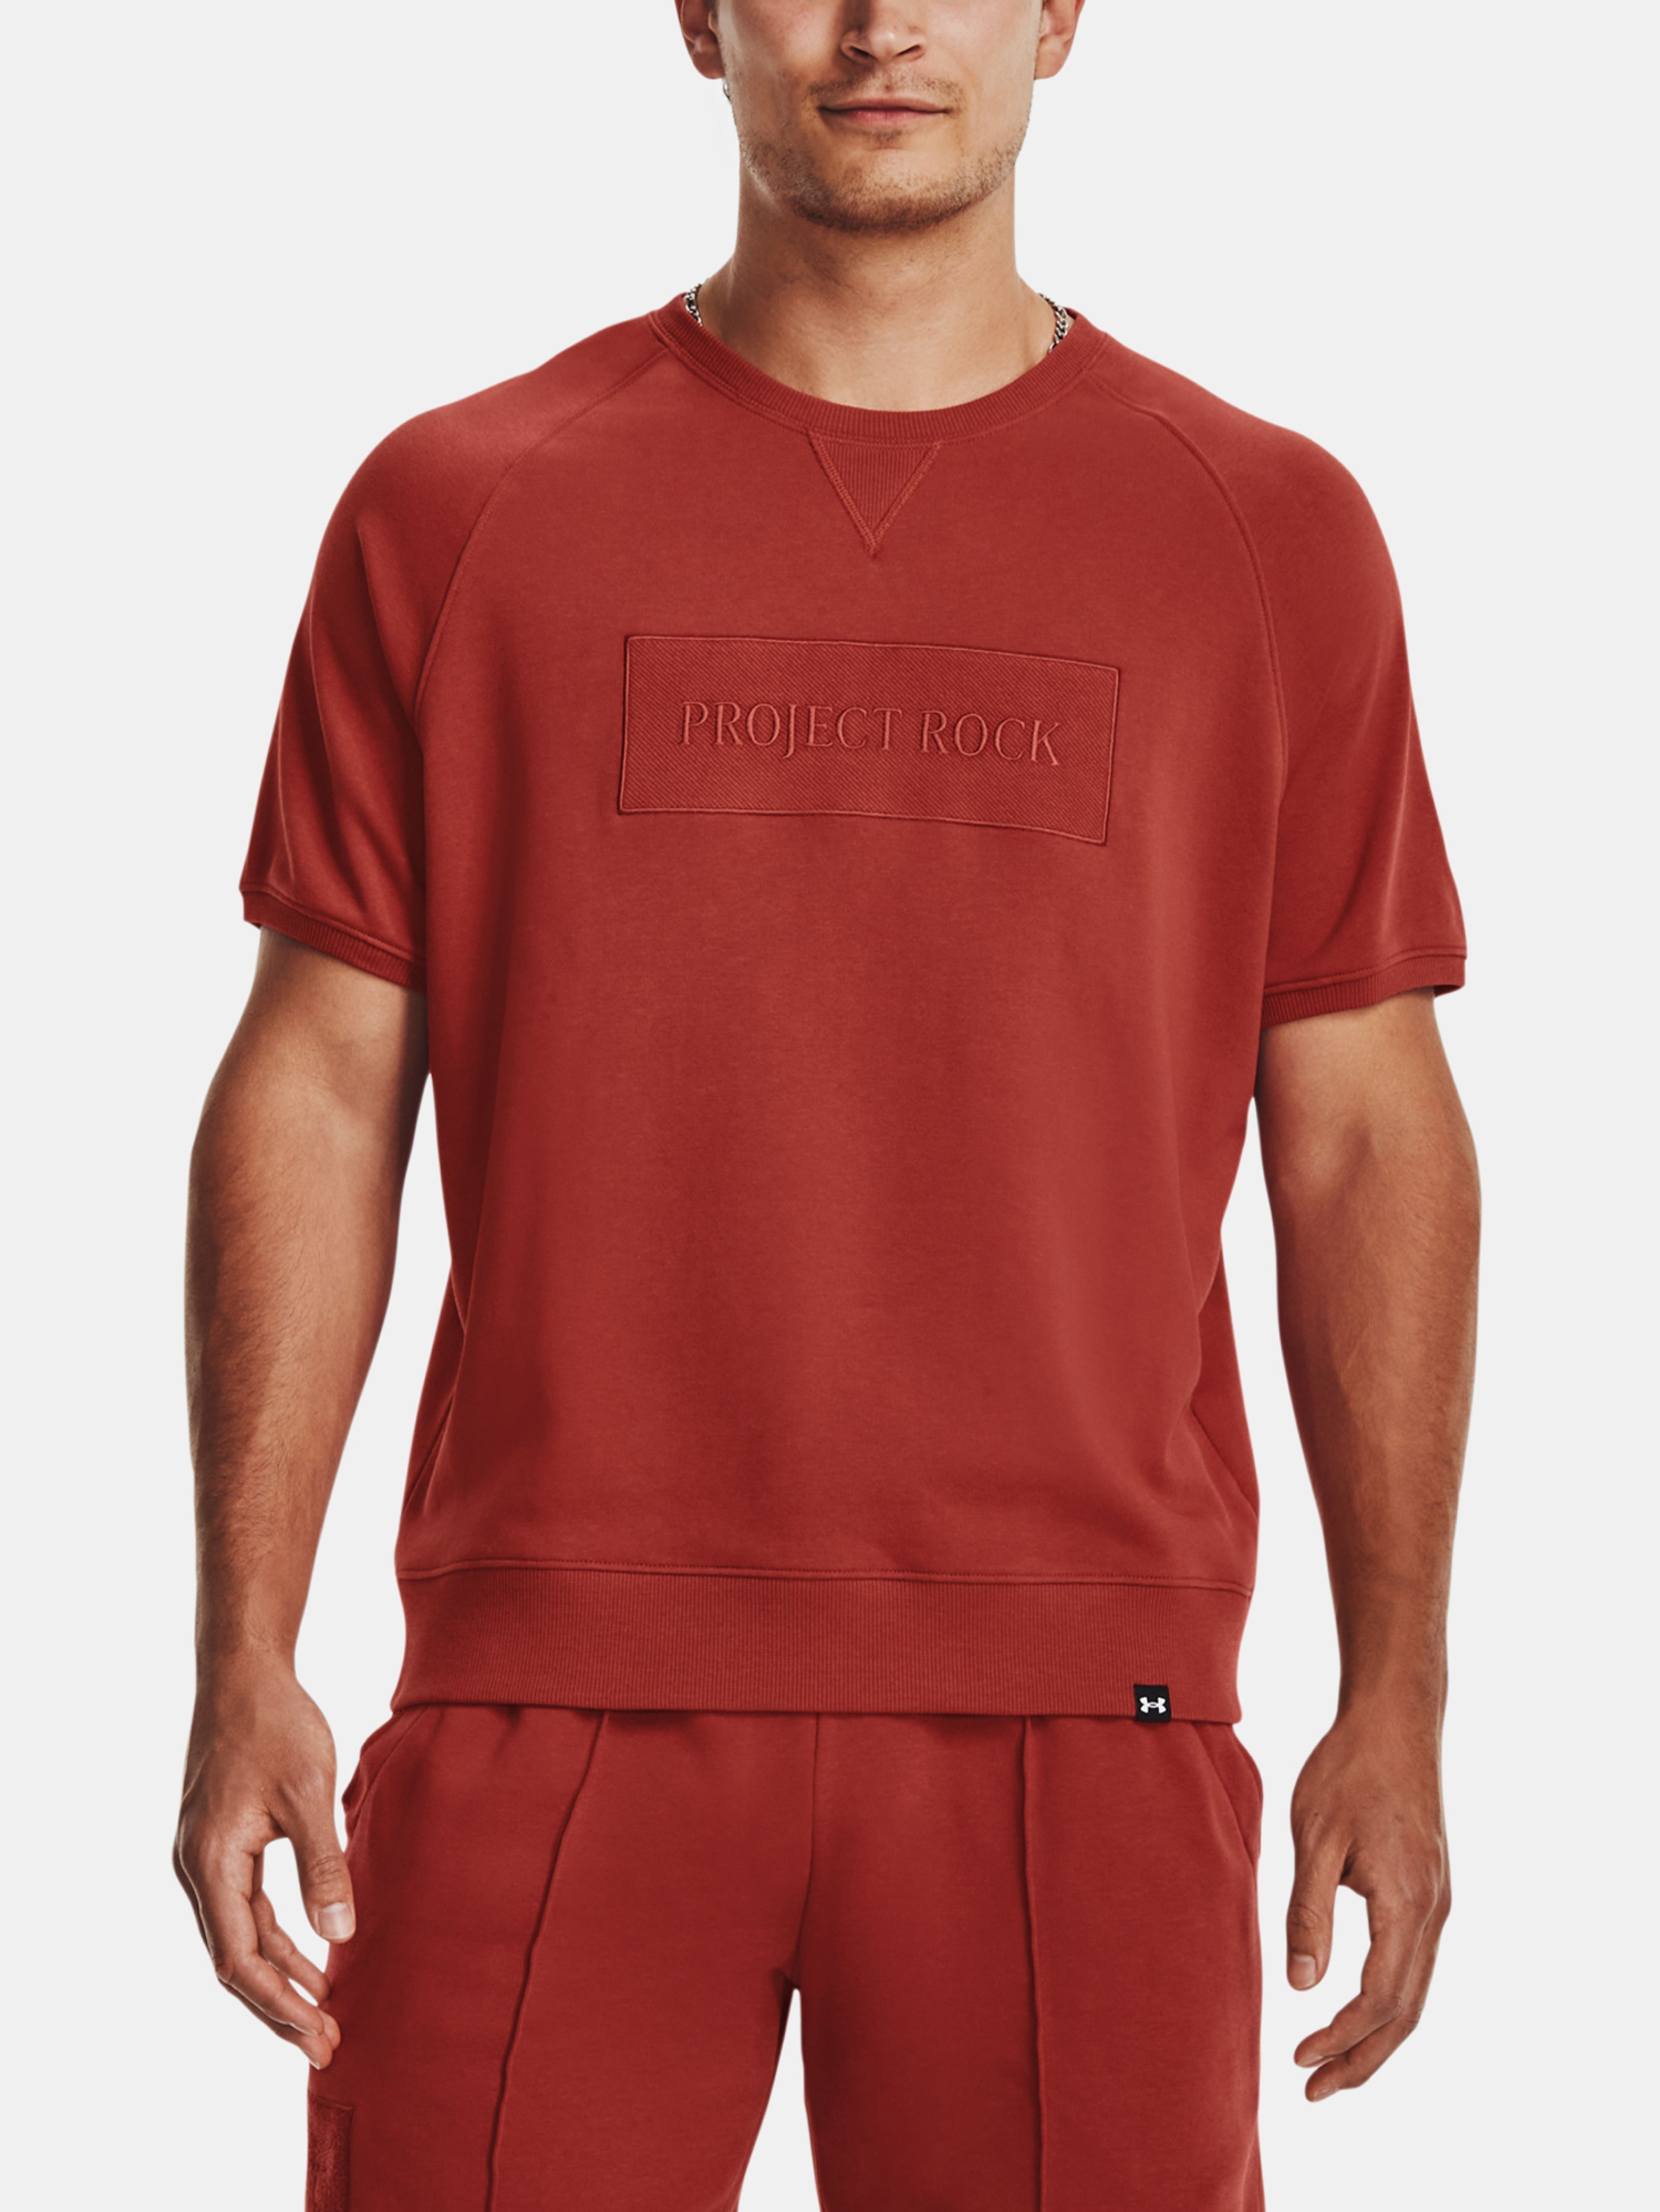 Pulover Under Armour Pjt Rock Terry Gym Top-RED